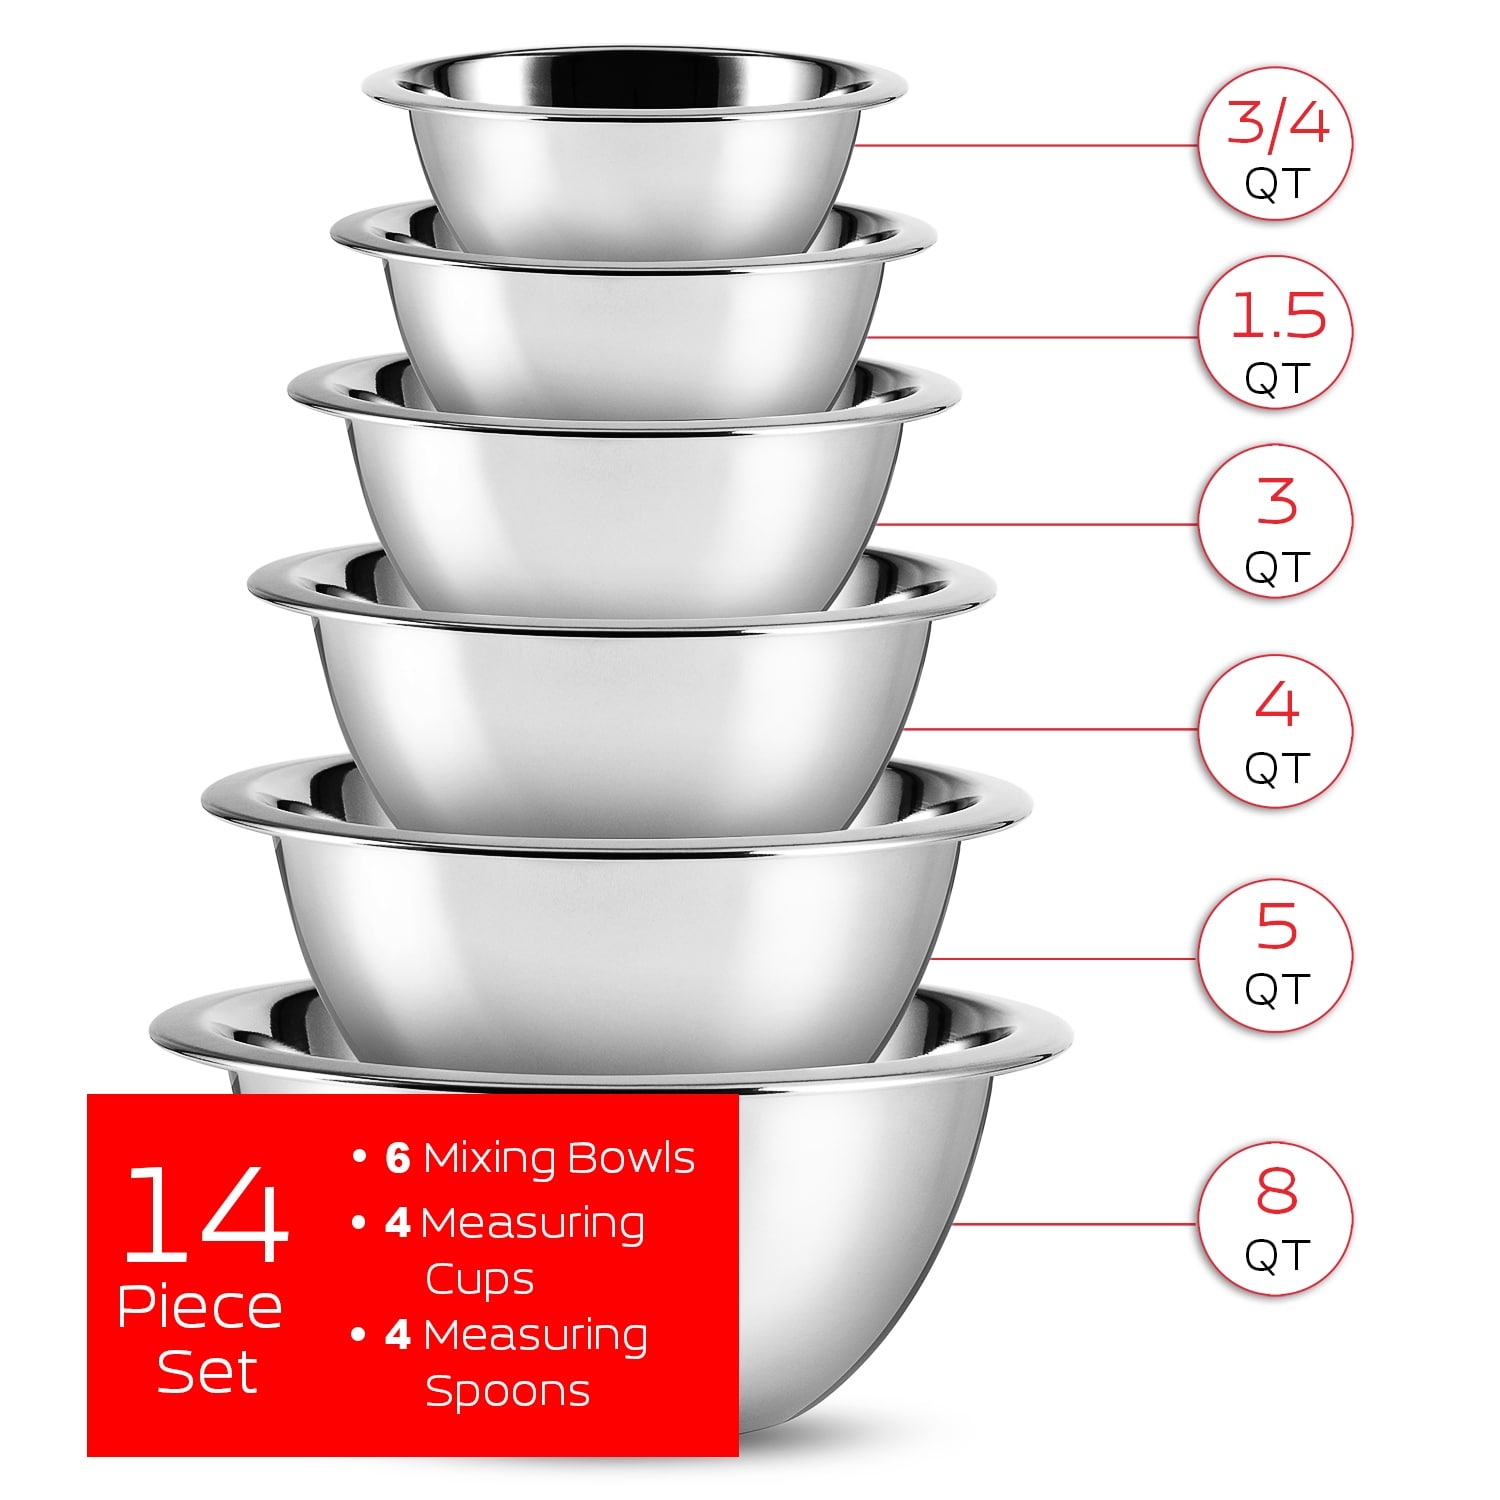 Mixing Bowls with Airtight Lids, 25 piece Stainless Steel Nesting Colorful Mixing  Bowls Set with 7 Size - 7, 6, 5, 4, 3, 2, 1.5QT, Fit for Mixing, Baking,  Serving 